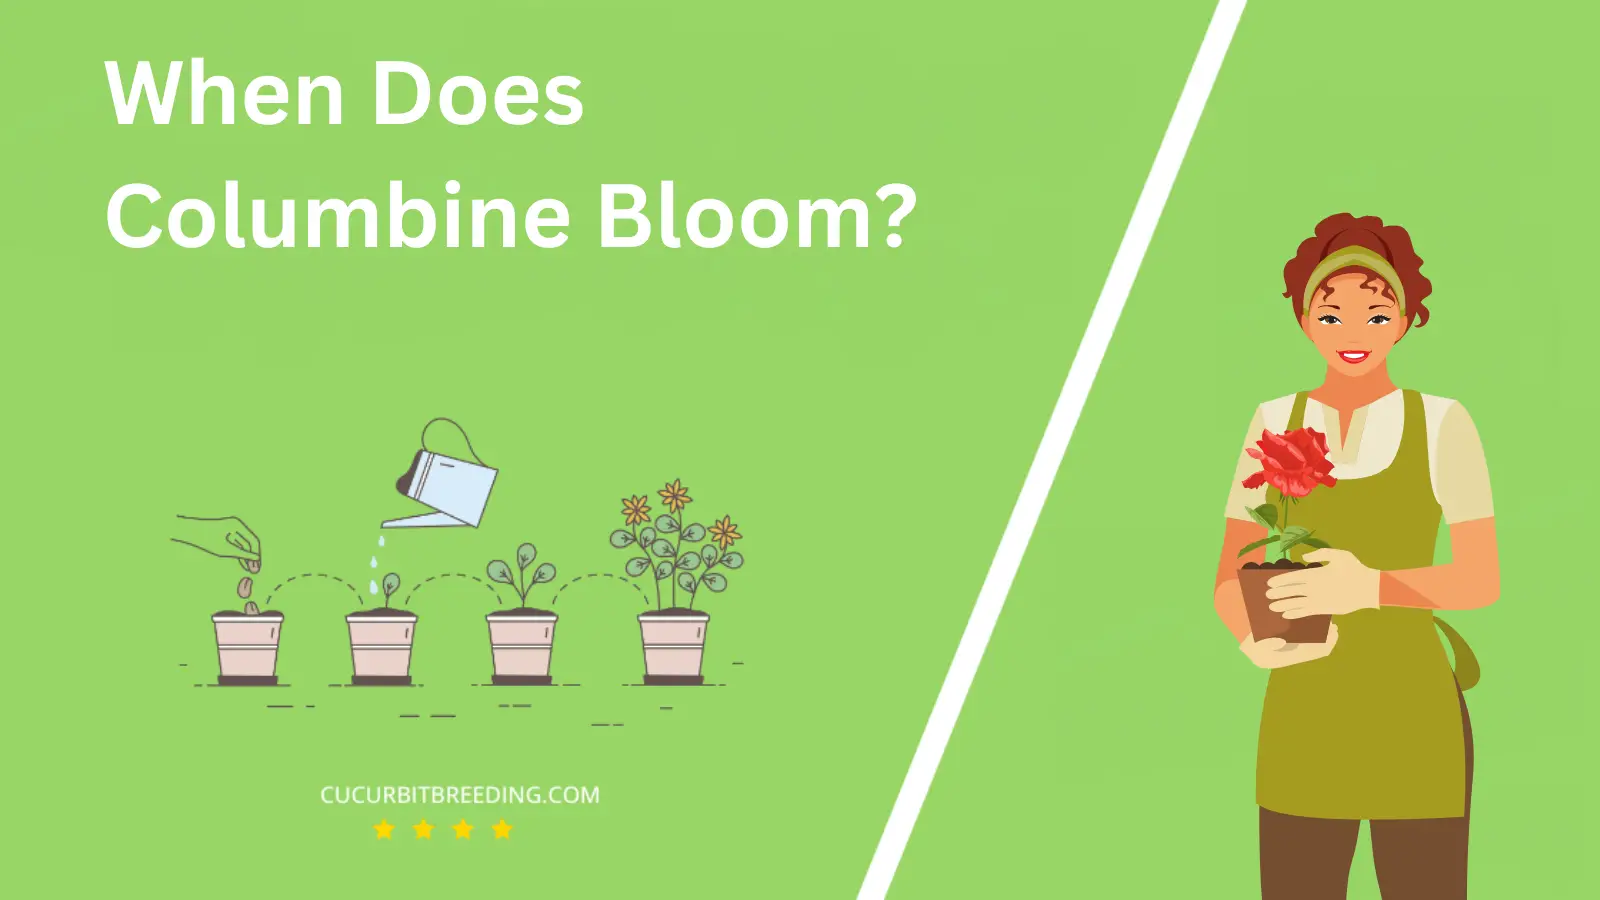 When Does Columbine Bloom?